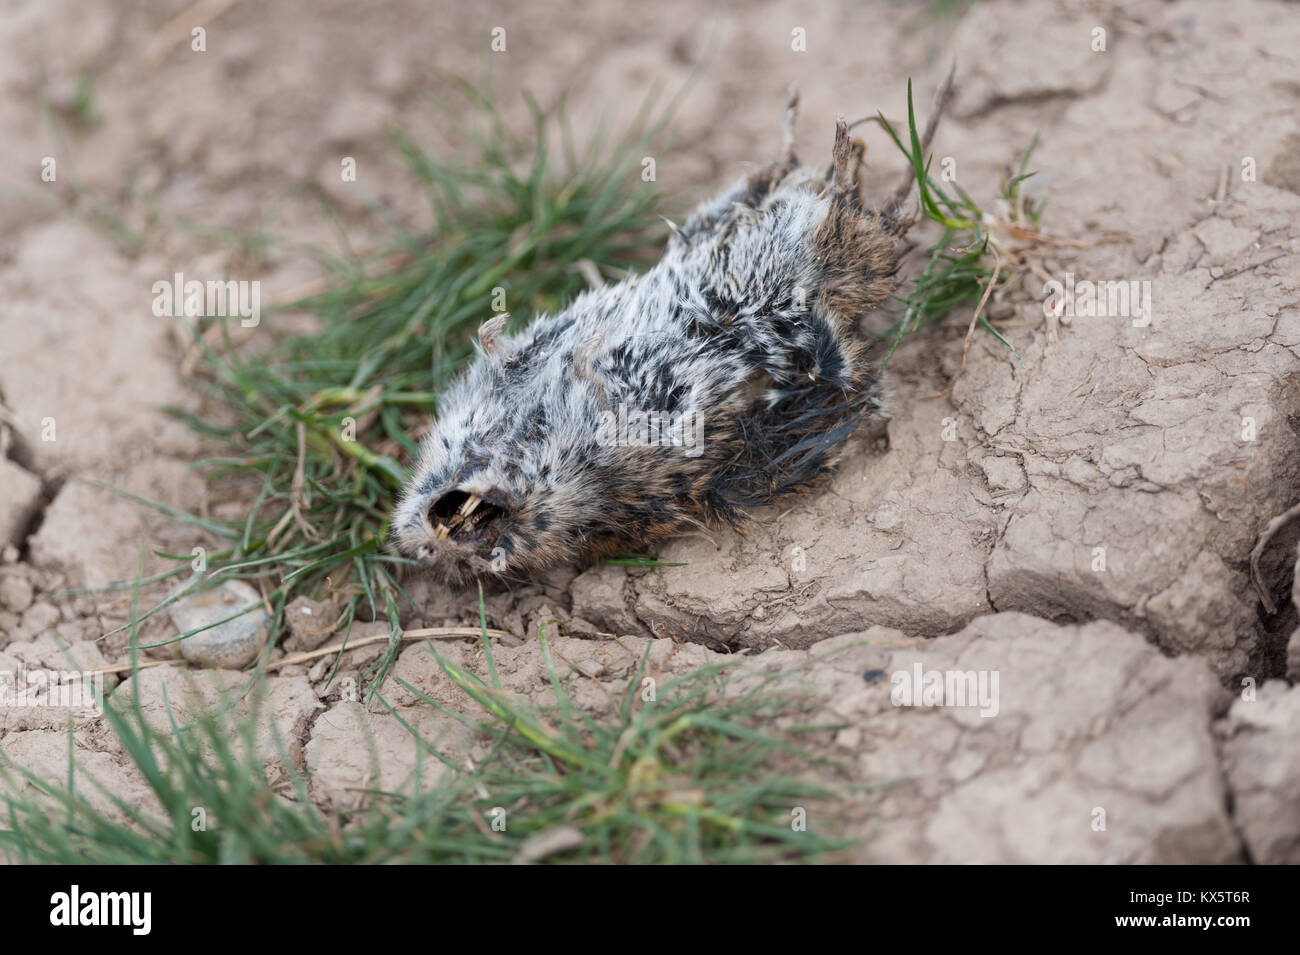 Dead rat and dried mud. Stock Photo